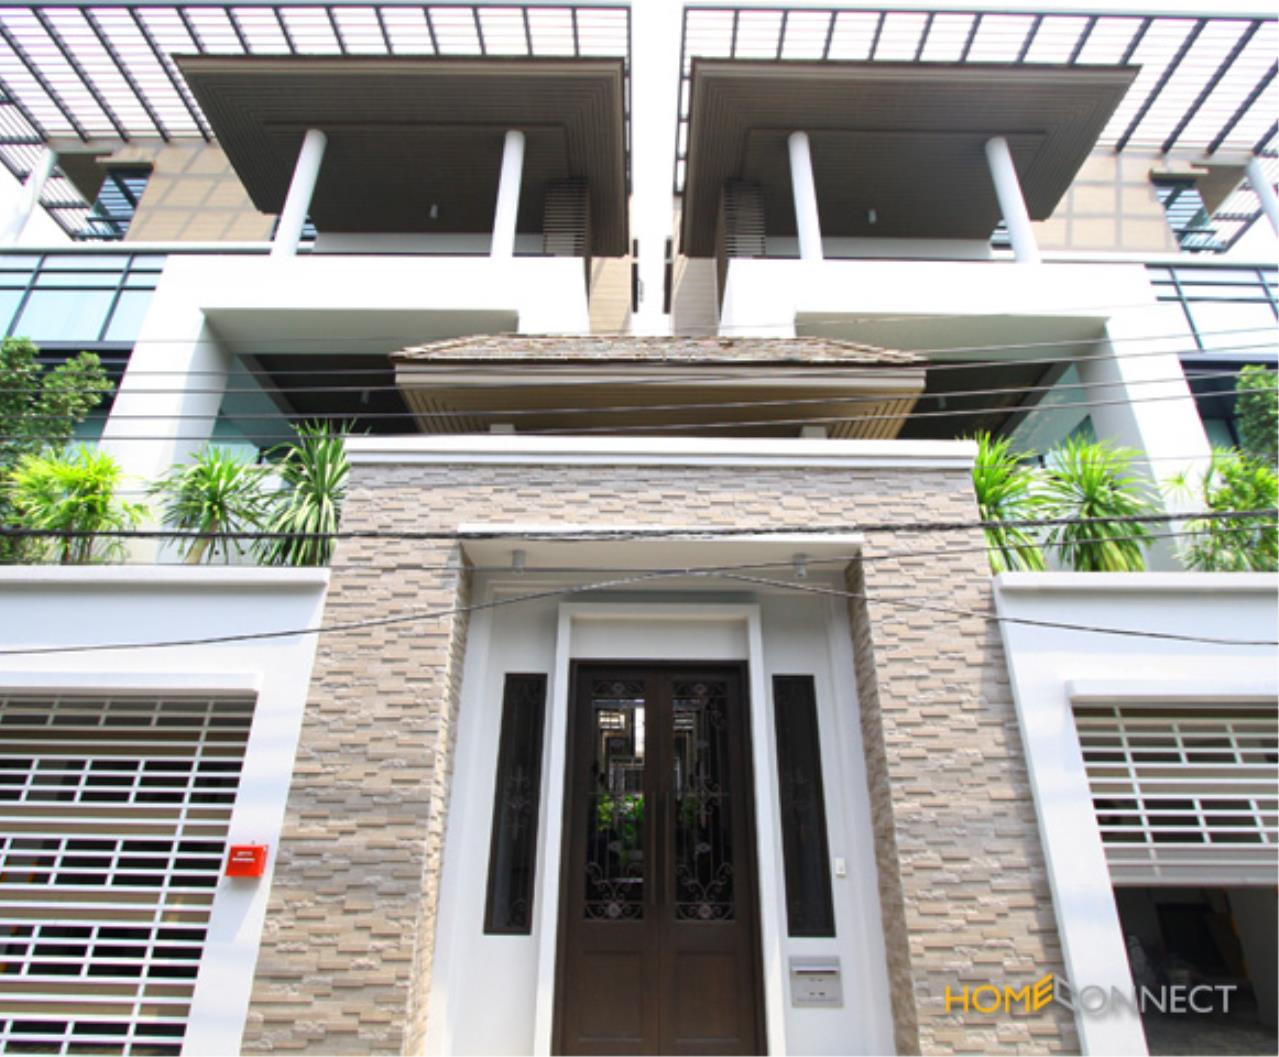 Home Connect Thailand Agency's House in Compound for Rent in Ekamai area 3